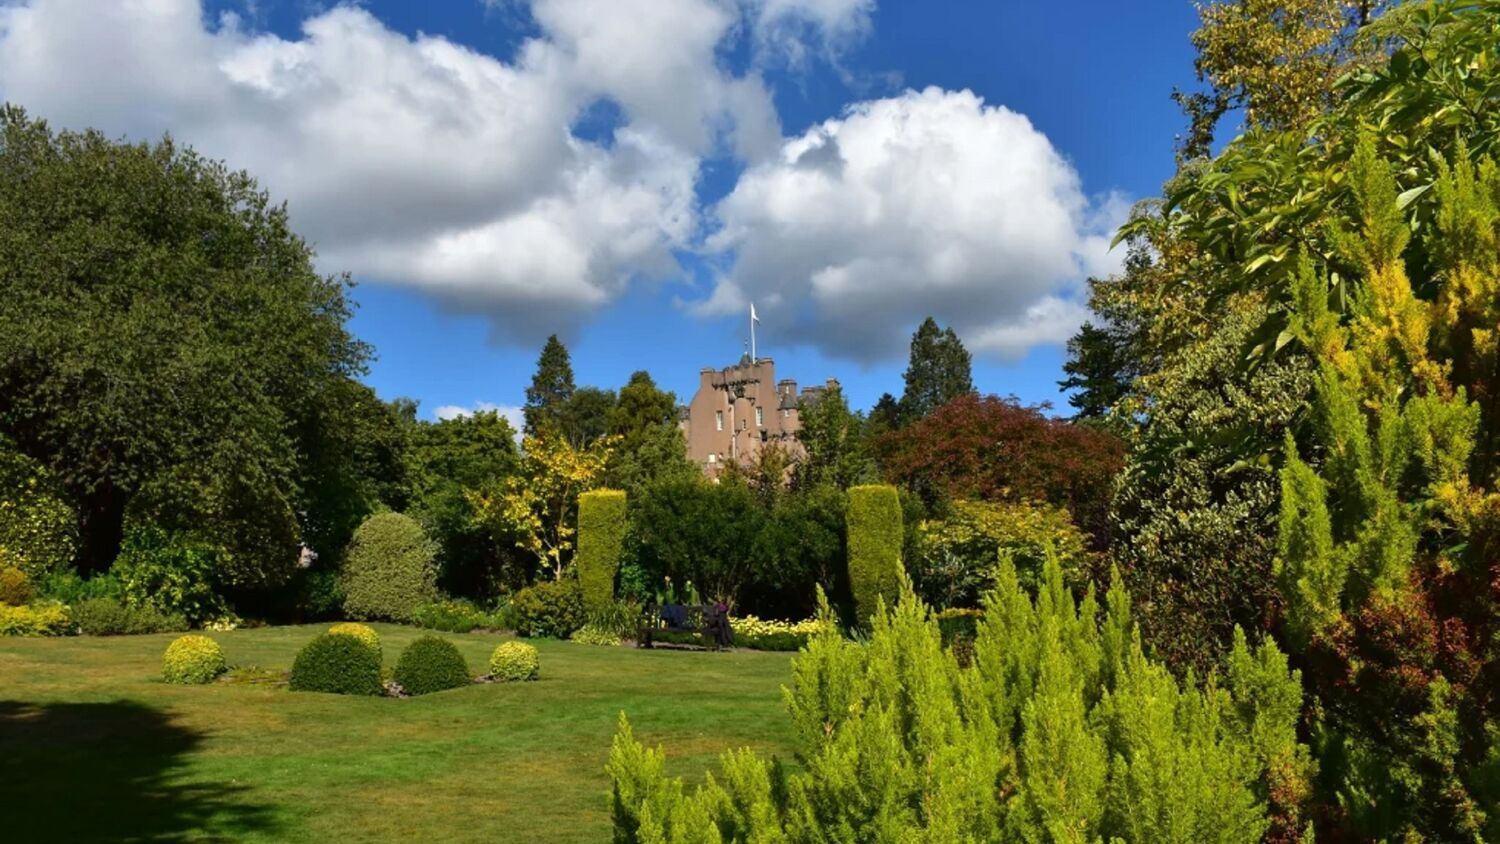 A view of the Golden Garden area at Crathes Castle, featuring a square of lawn surrounded by well-established conifers and shrubs. The castle can be seen in the background, with a white flag flying.